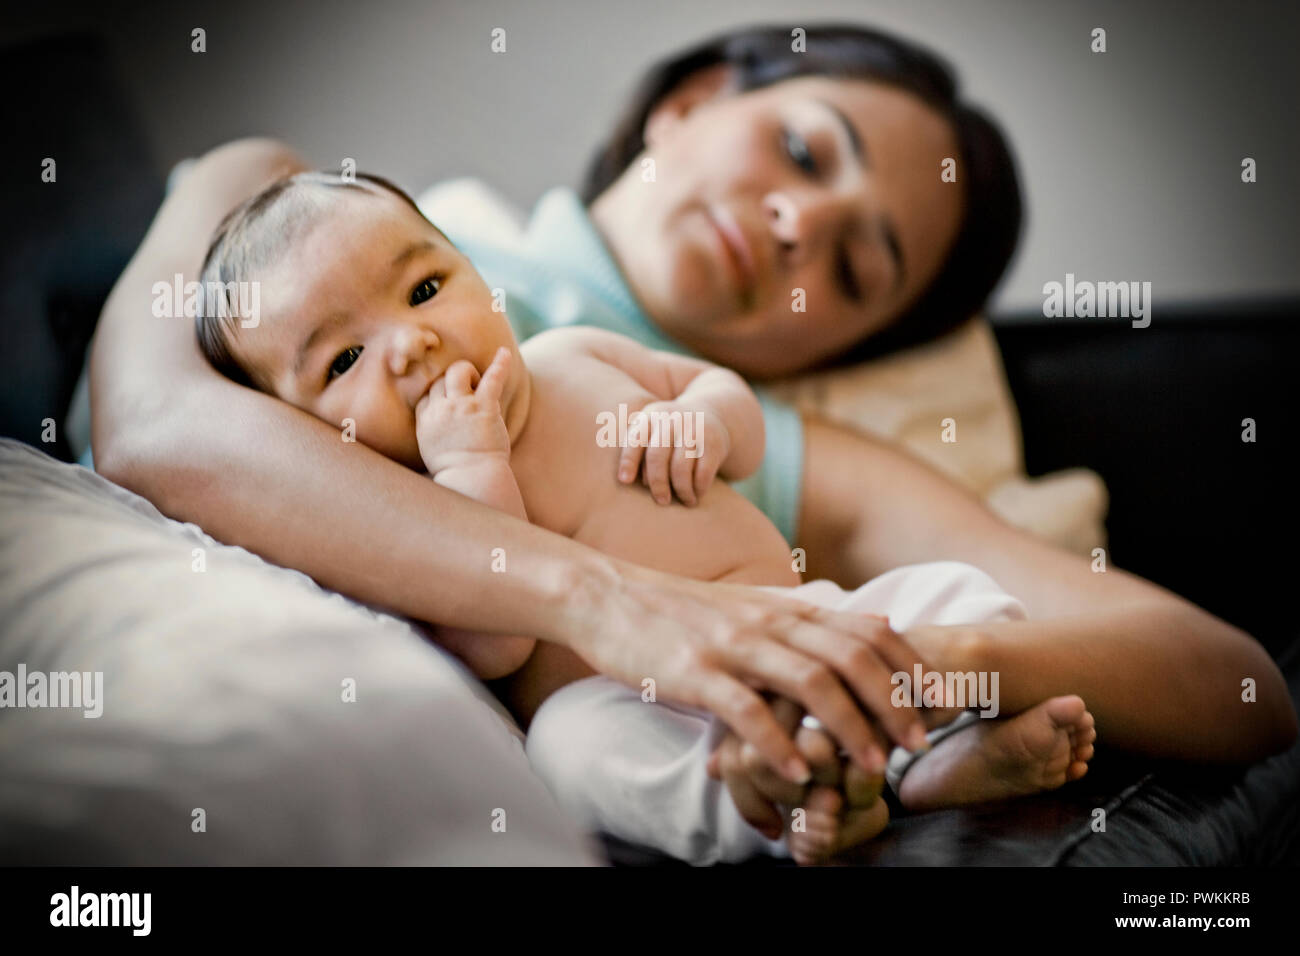 Young baby being held by it's mother on a sofa. Stock Photo